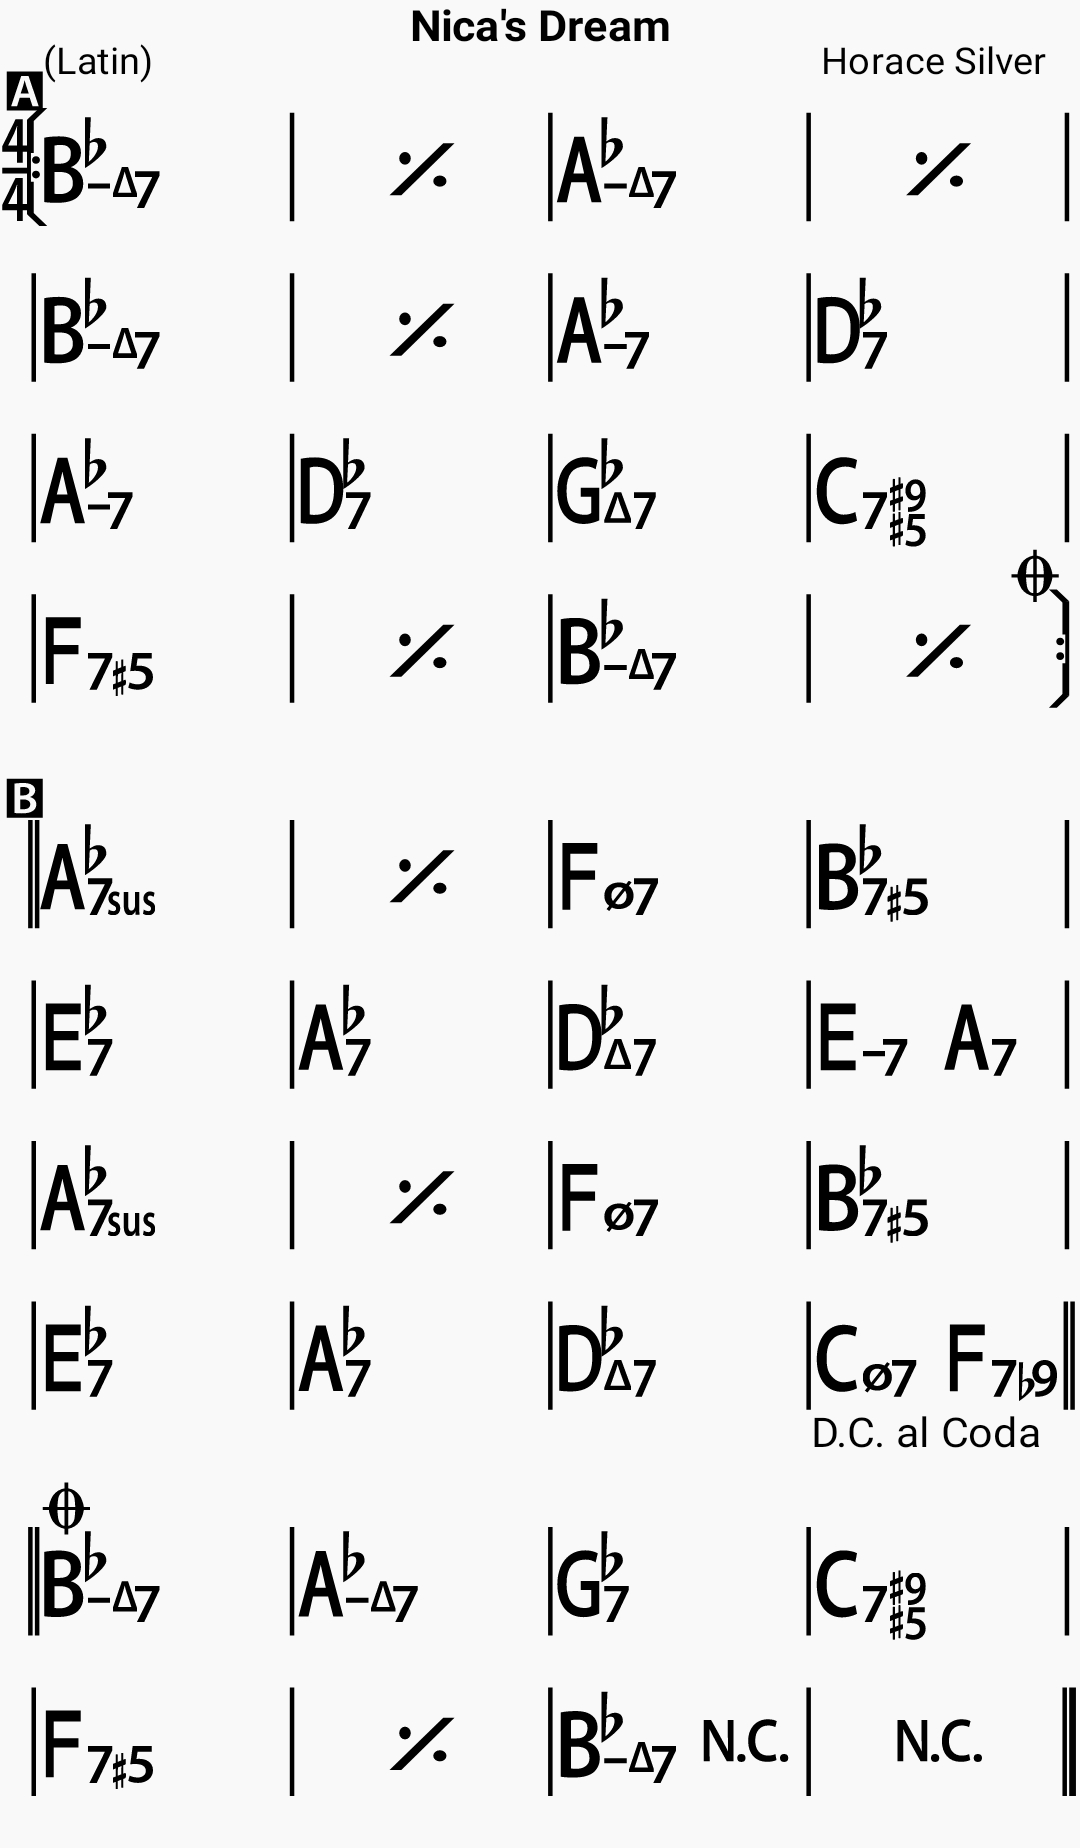 Chord chart for the jazz standard Nica's Dream